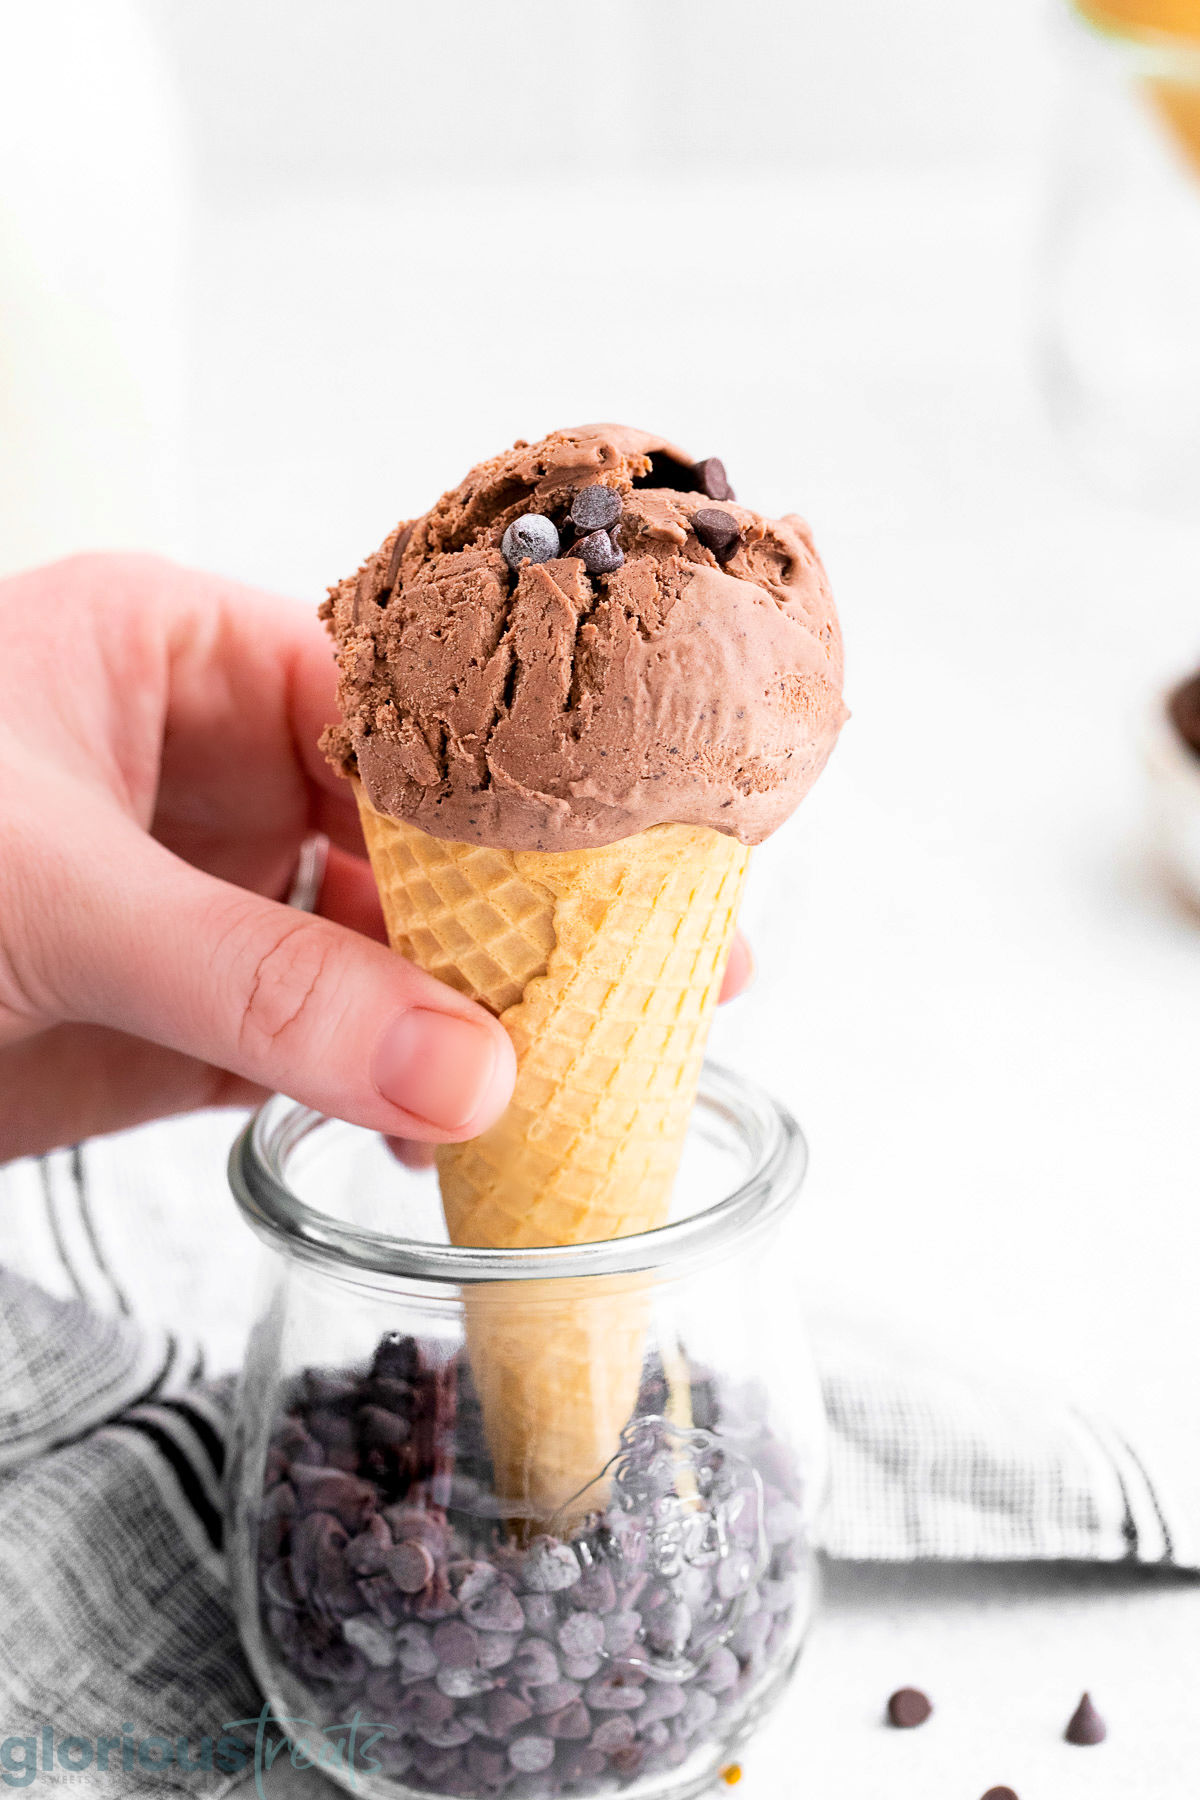 A side view of a hand grabbing the ice cream cone with a scoop of no-churn chocolate ice cream on top.